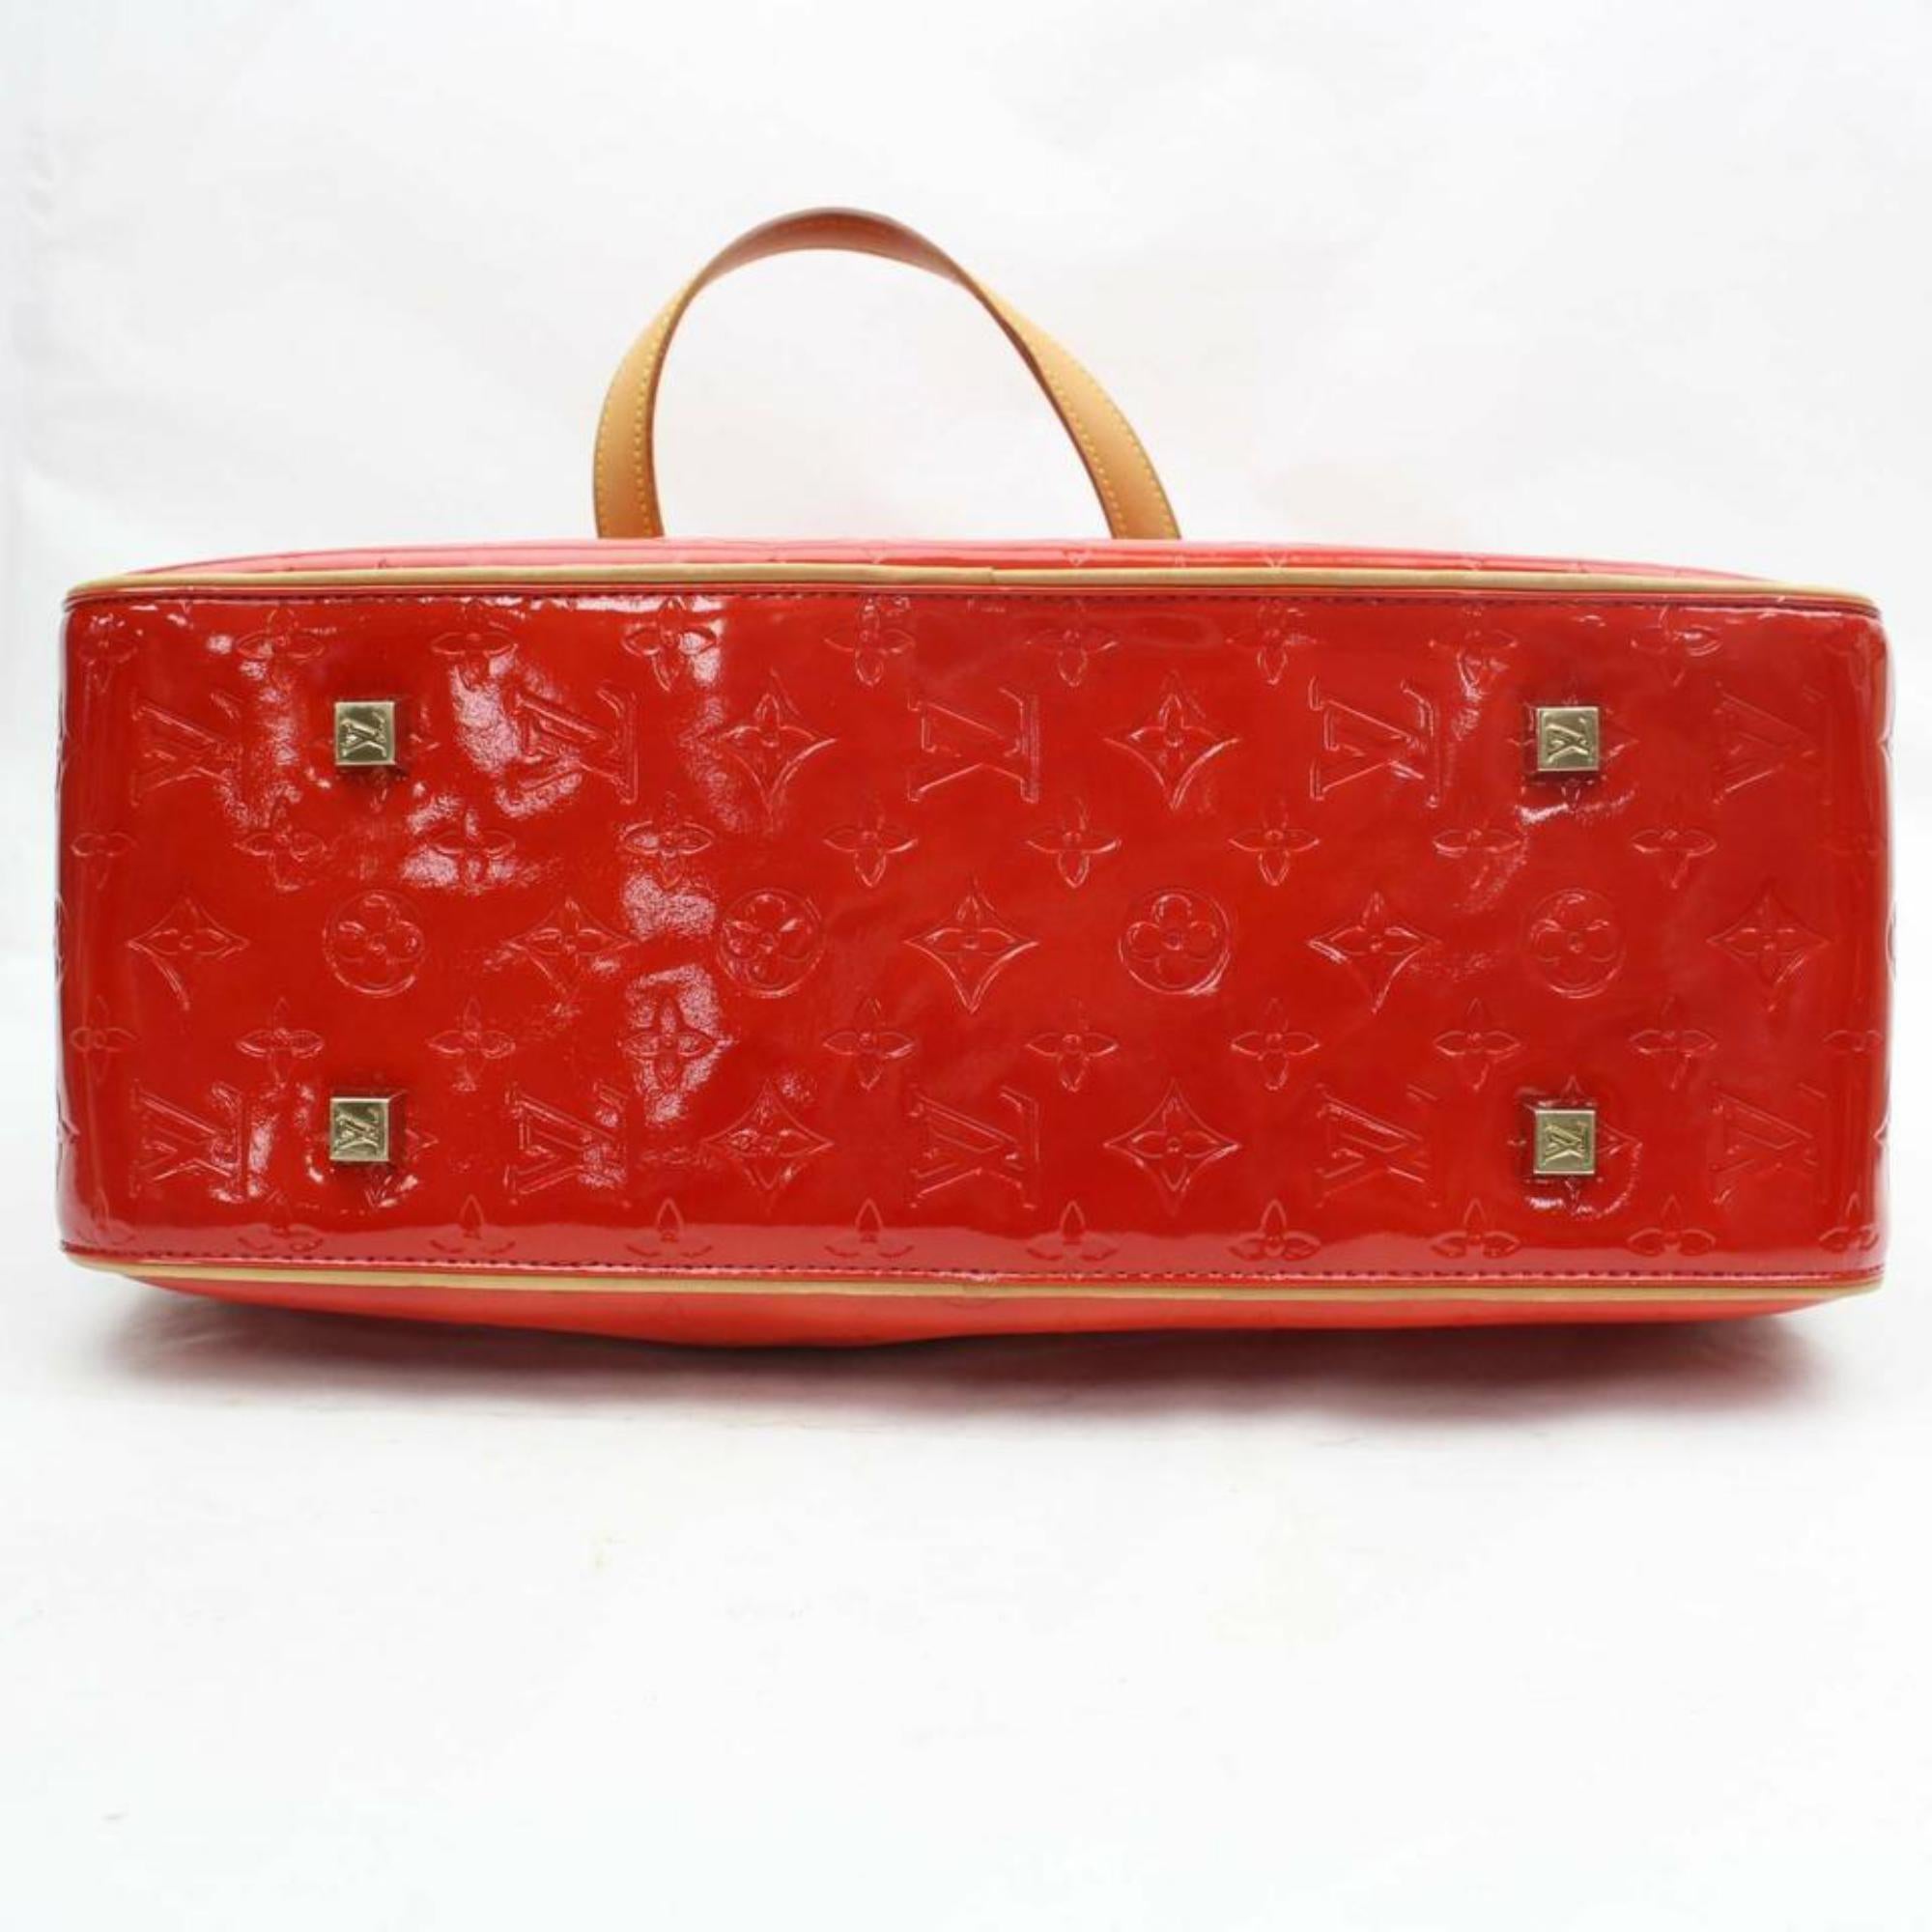 Louis Vuitton Vernis Zip Tote 870301 Red Patent Leather Weekend/Travel BAG For Sale 4